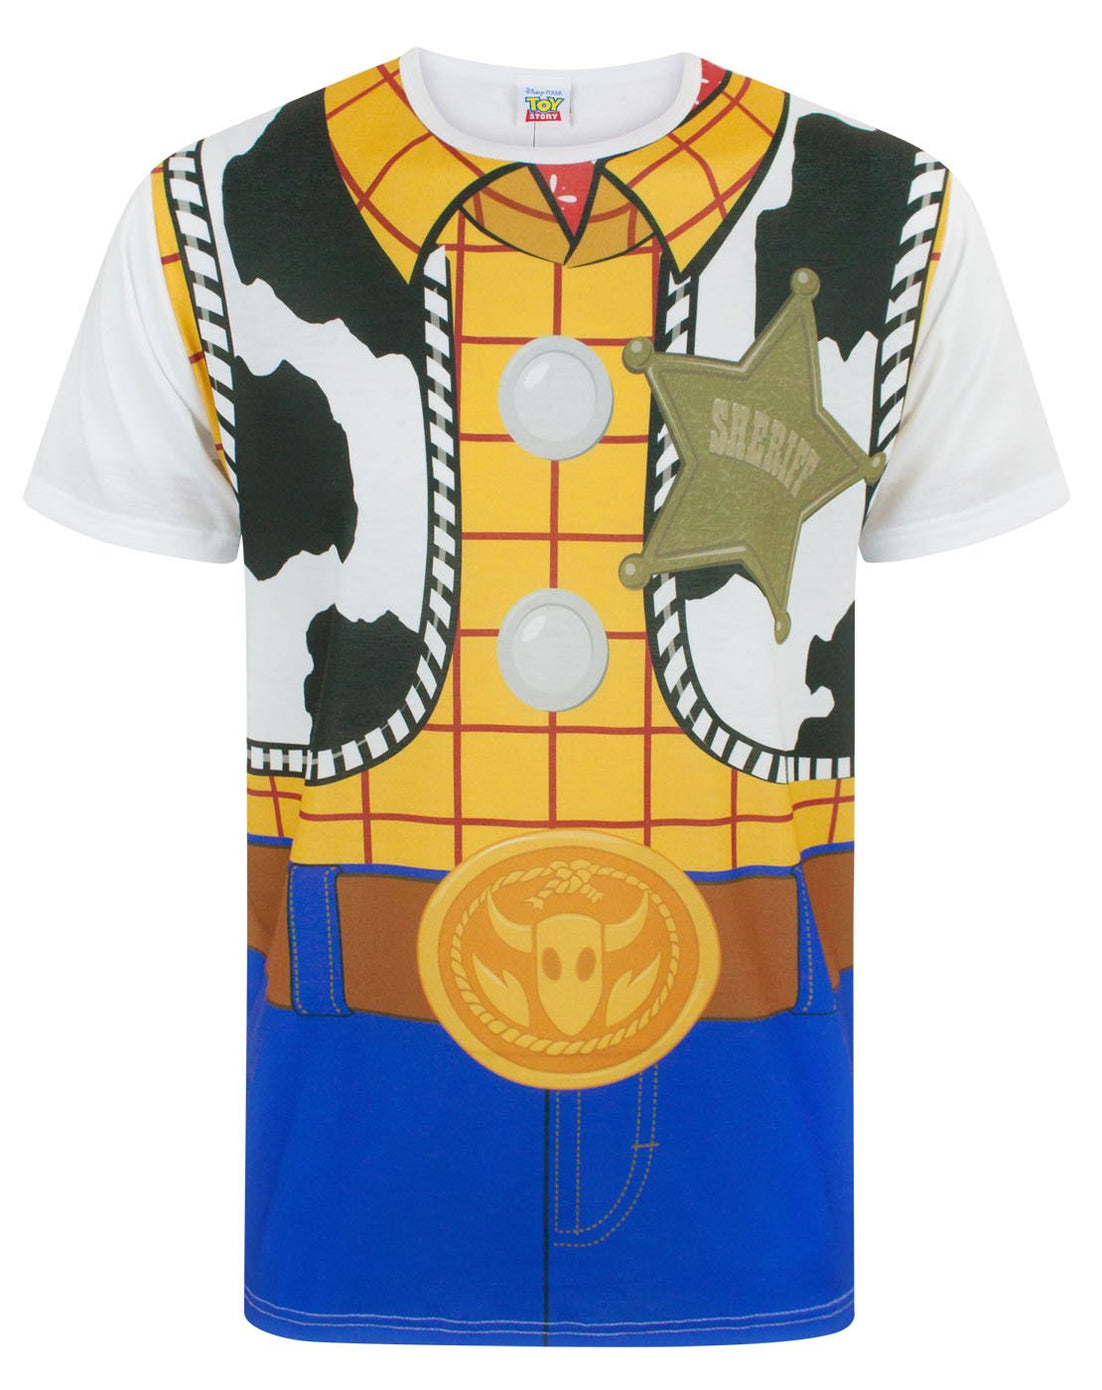 Disney Toy Story Woody Cowboy Costume Outfit Men's Adults Novelty T-Sh ...